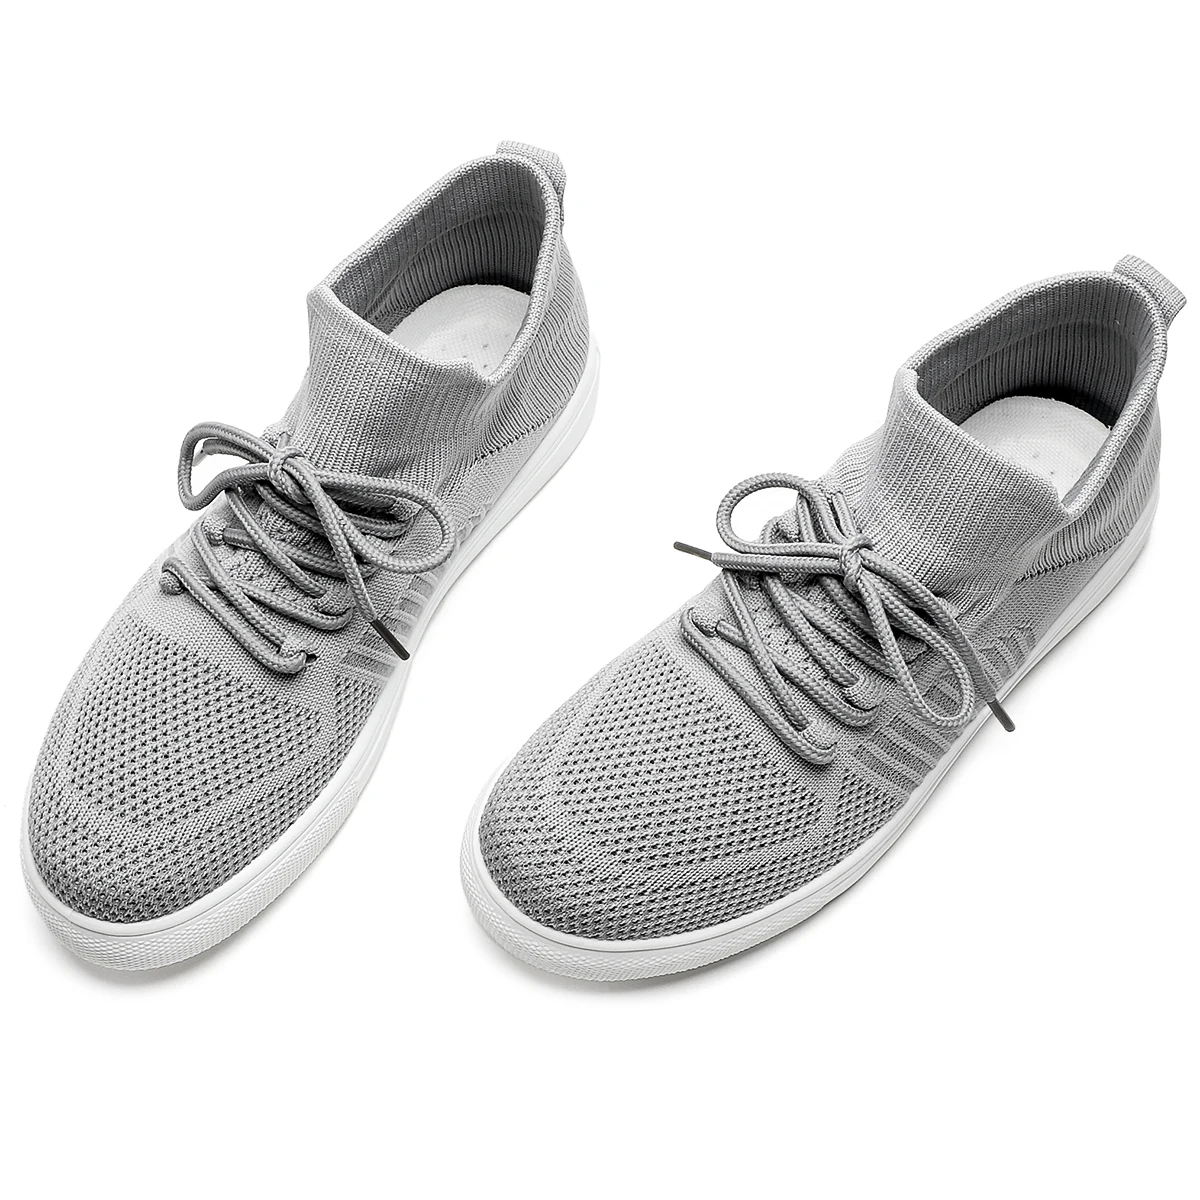 Wenzhou Factory Round Toe Lace Up Walking Style Sneakers Shoes Fly High Top Slip On Knit Mesh Walking Shoes